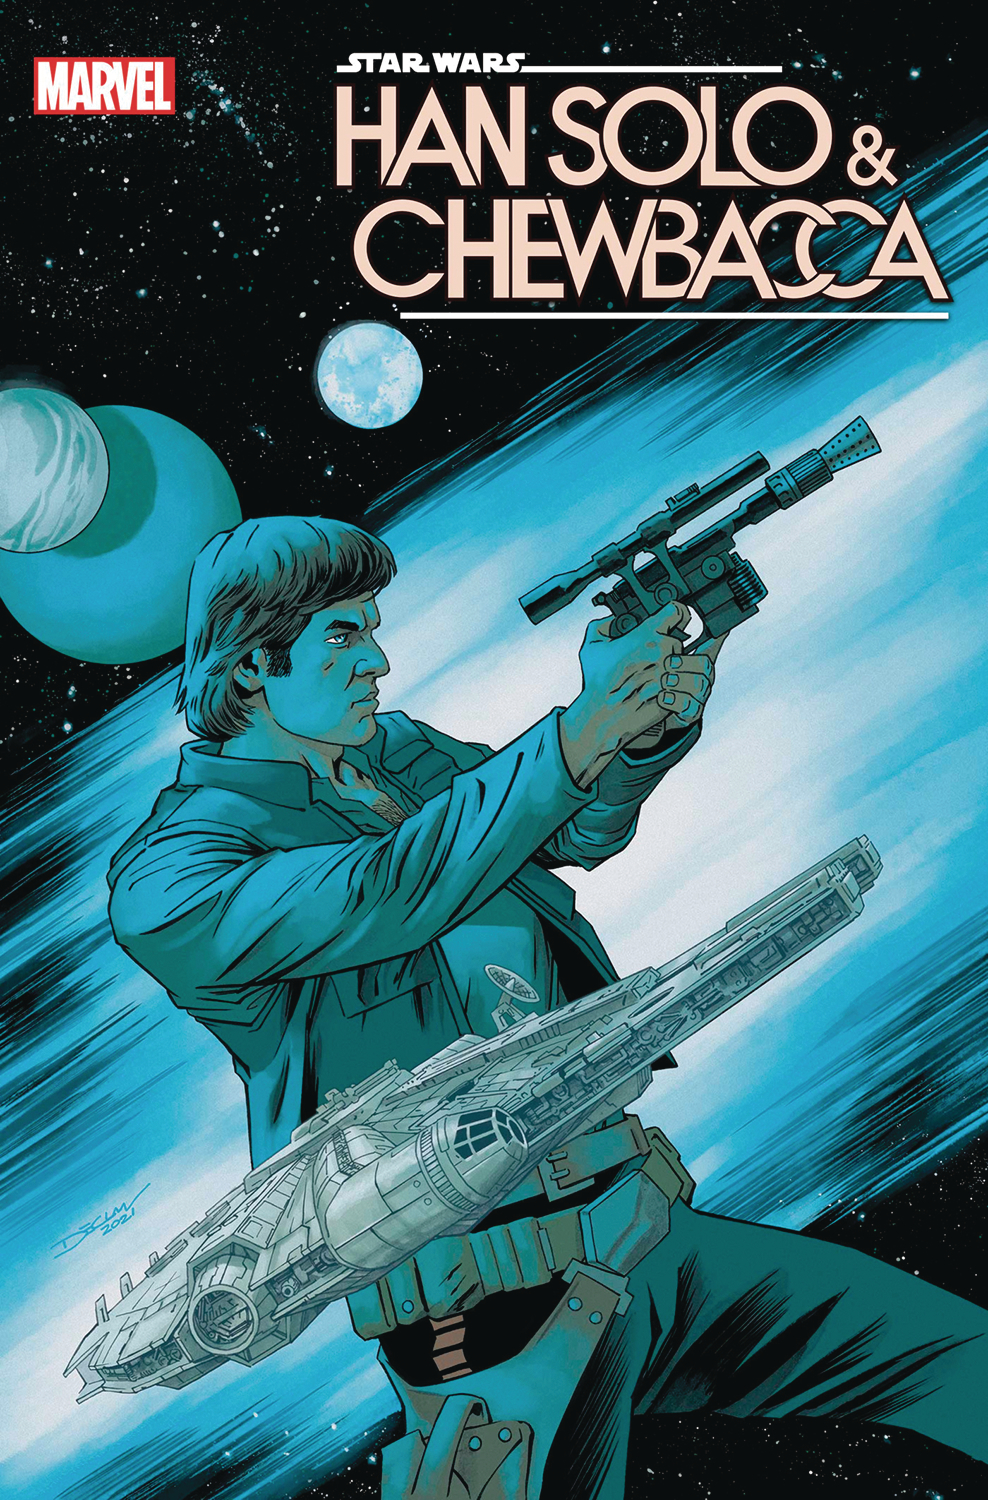 Star Wars Han Solo & Chewbacca #1 Shalvey Variant